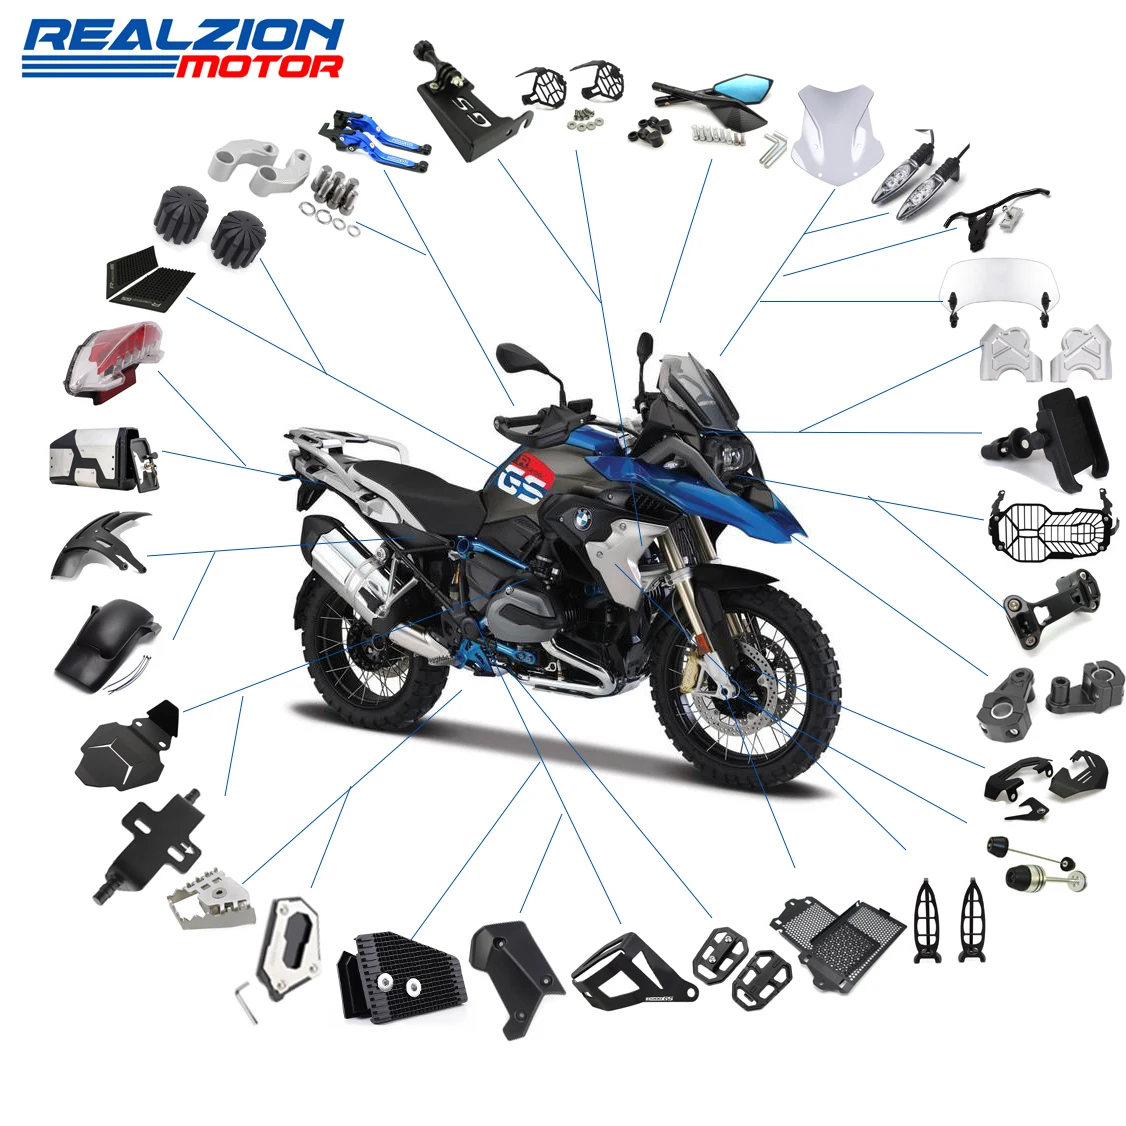 Wholesale Realzion Motorcycle CNC Exquisite Processing Parts For BMW S1000R S1000RR GS310 R1200GS R1250 From